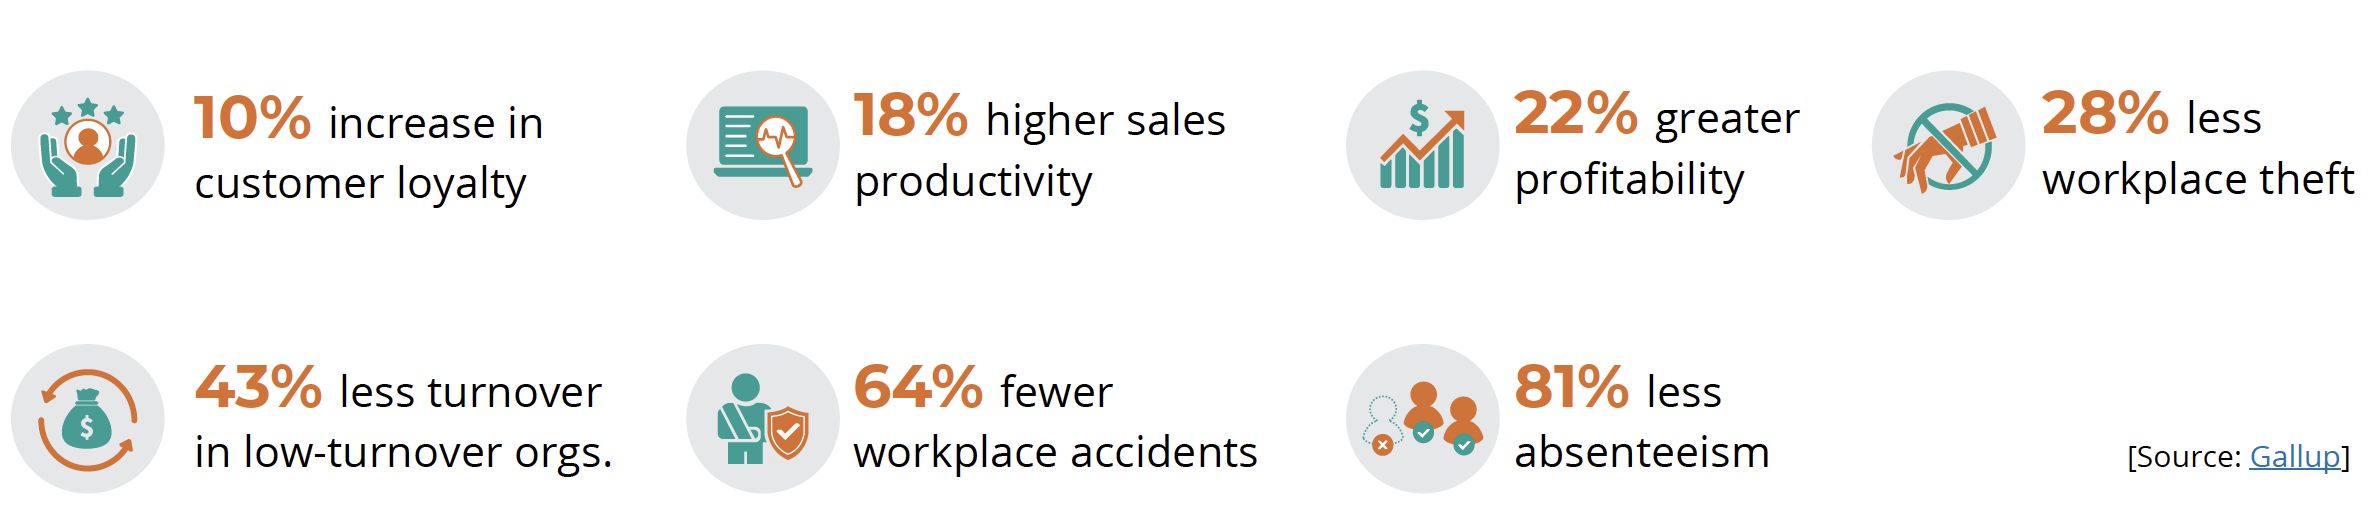 Highly engaged workforces have experienced on average: